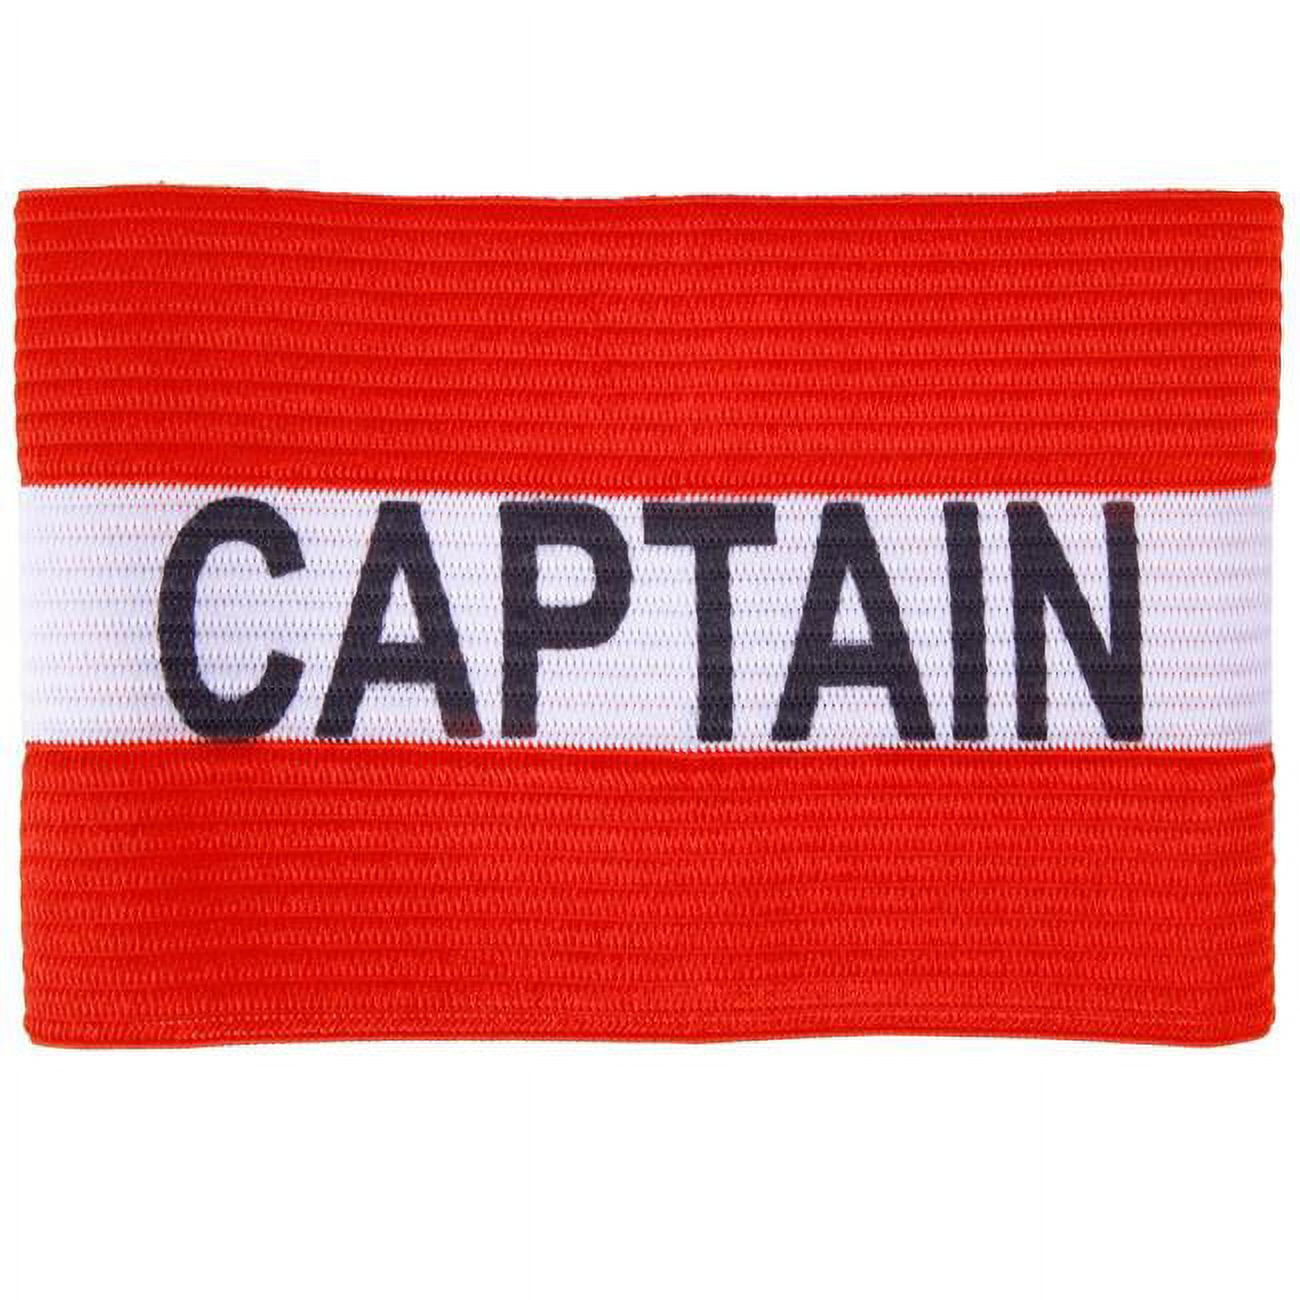 Picture of Brybelly SSCR-805 Captain Armband, Red - Adult